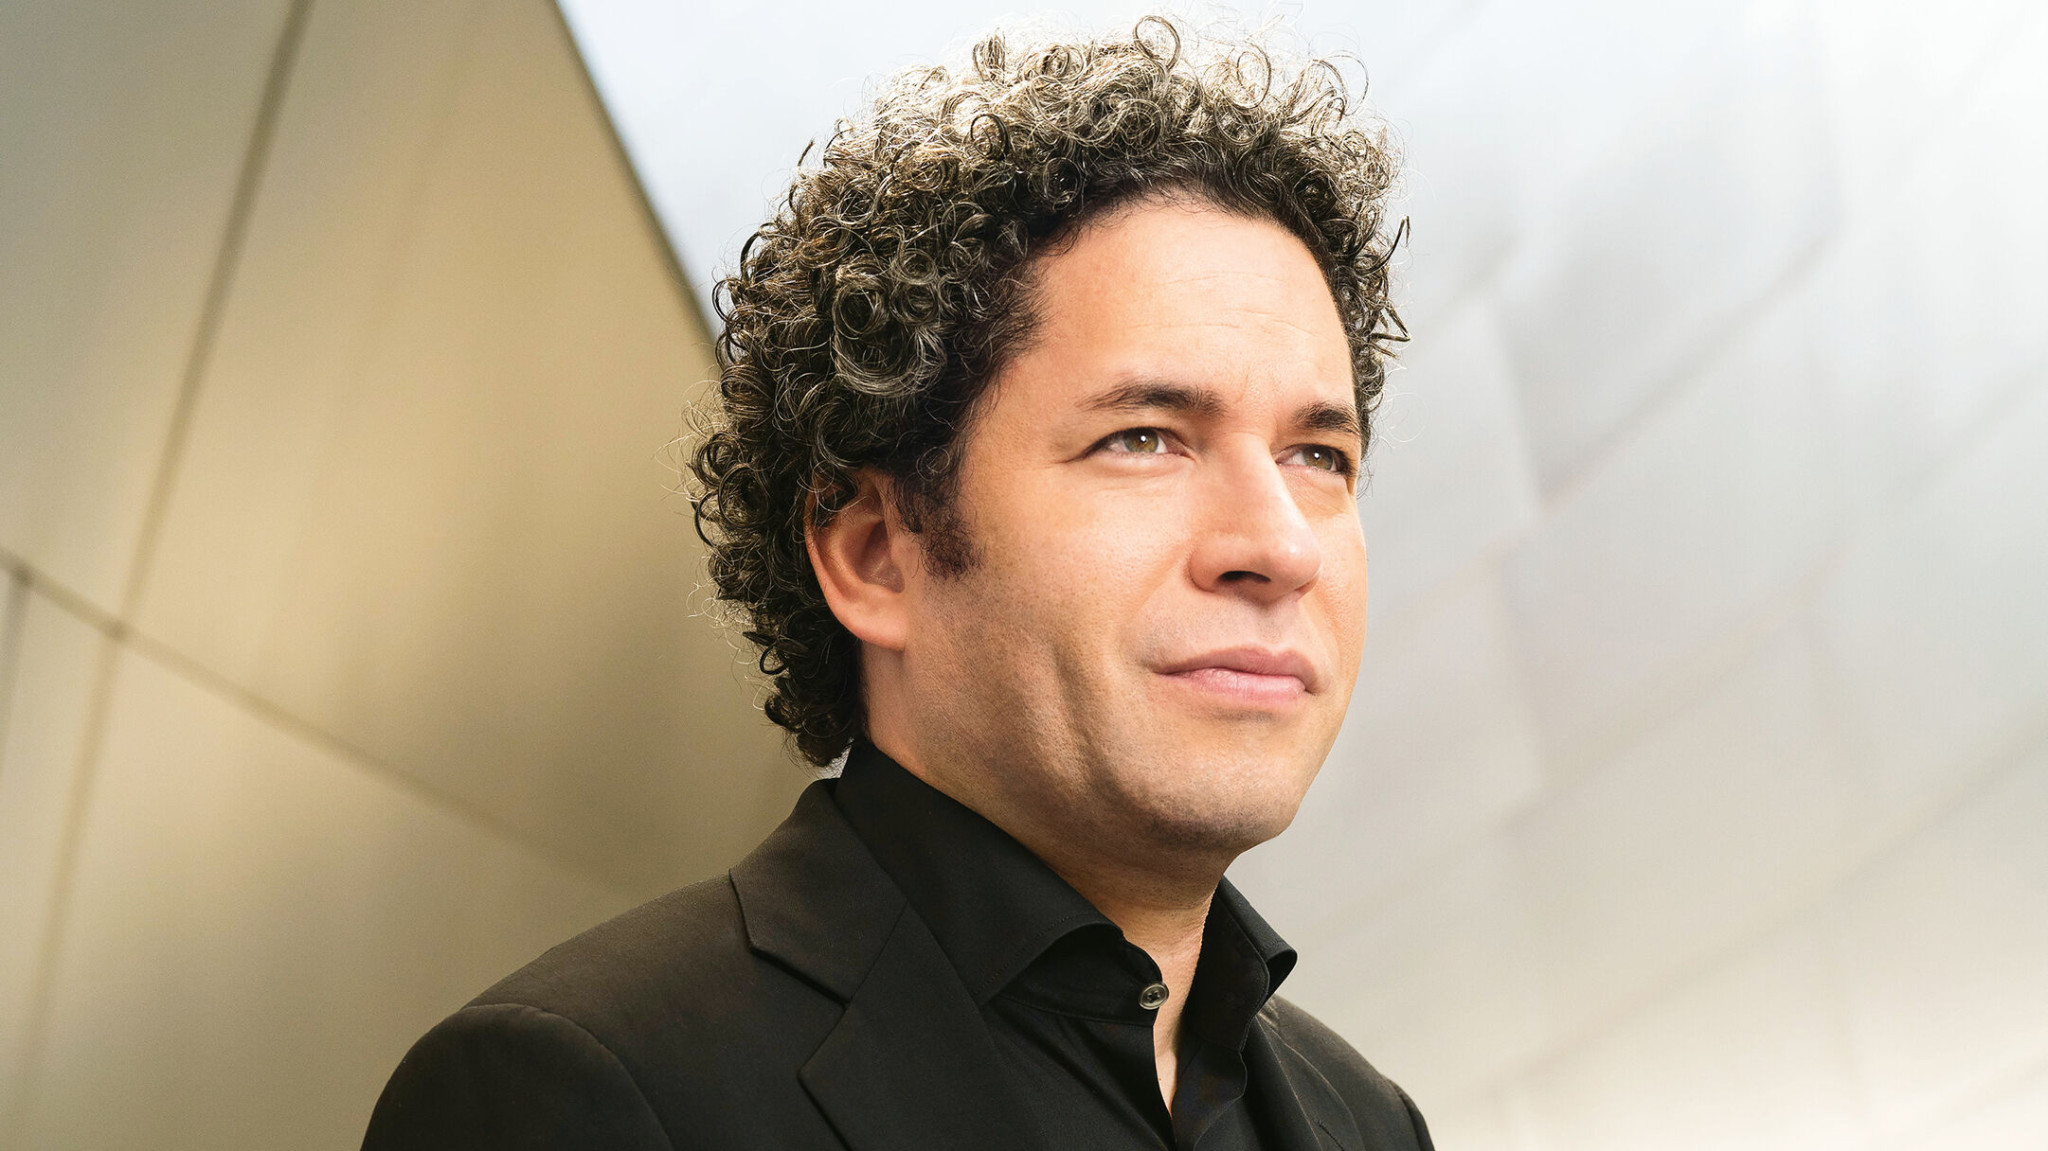 Gustavo Dudamel and the Los Angeles Philharmonic create immersive symphonic experience